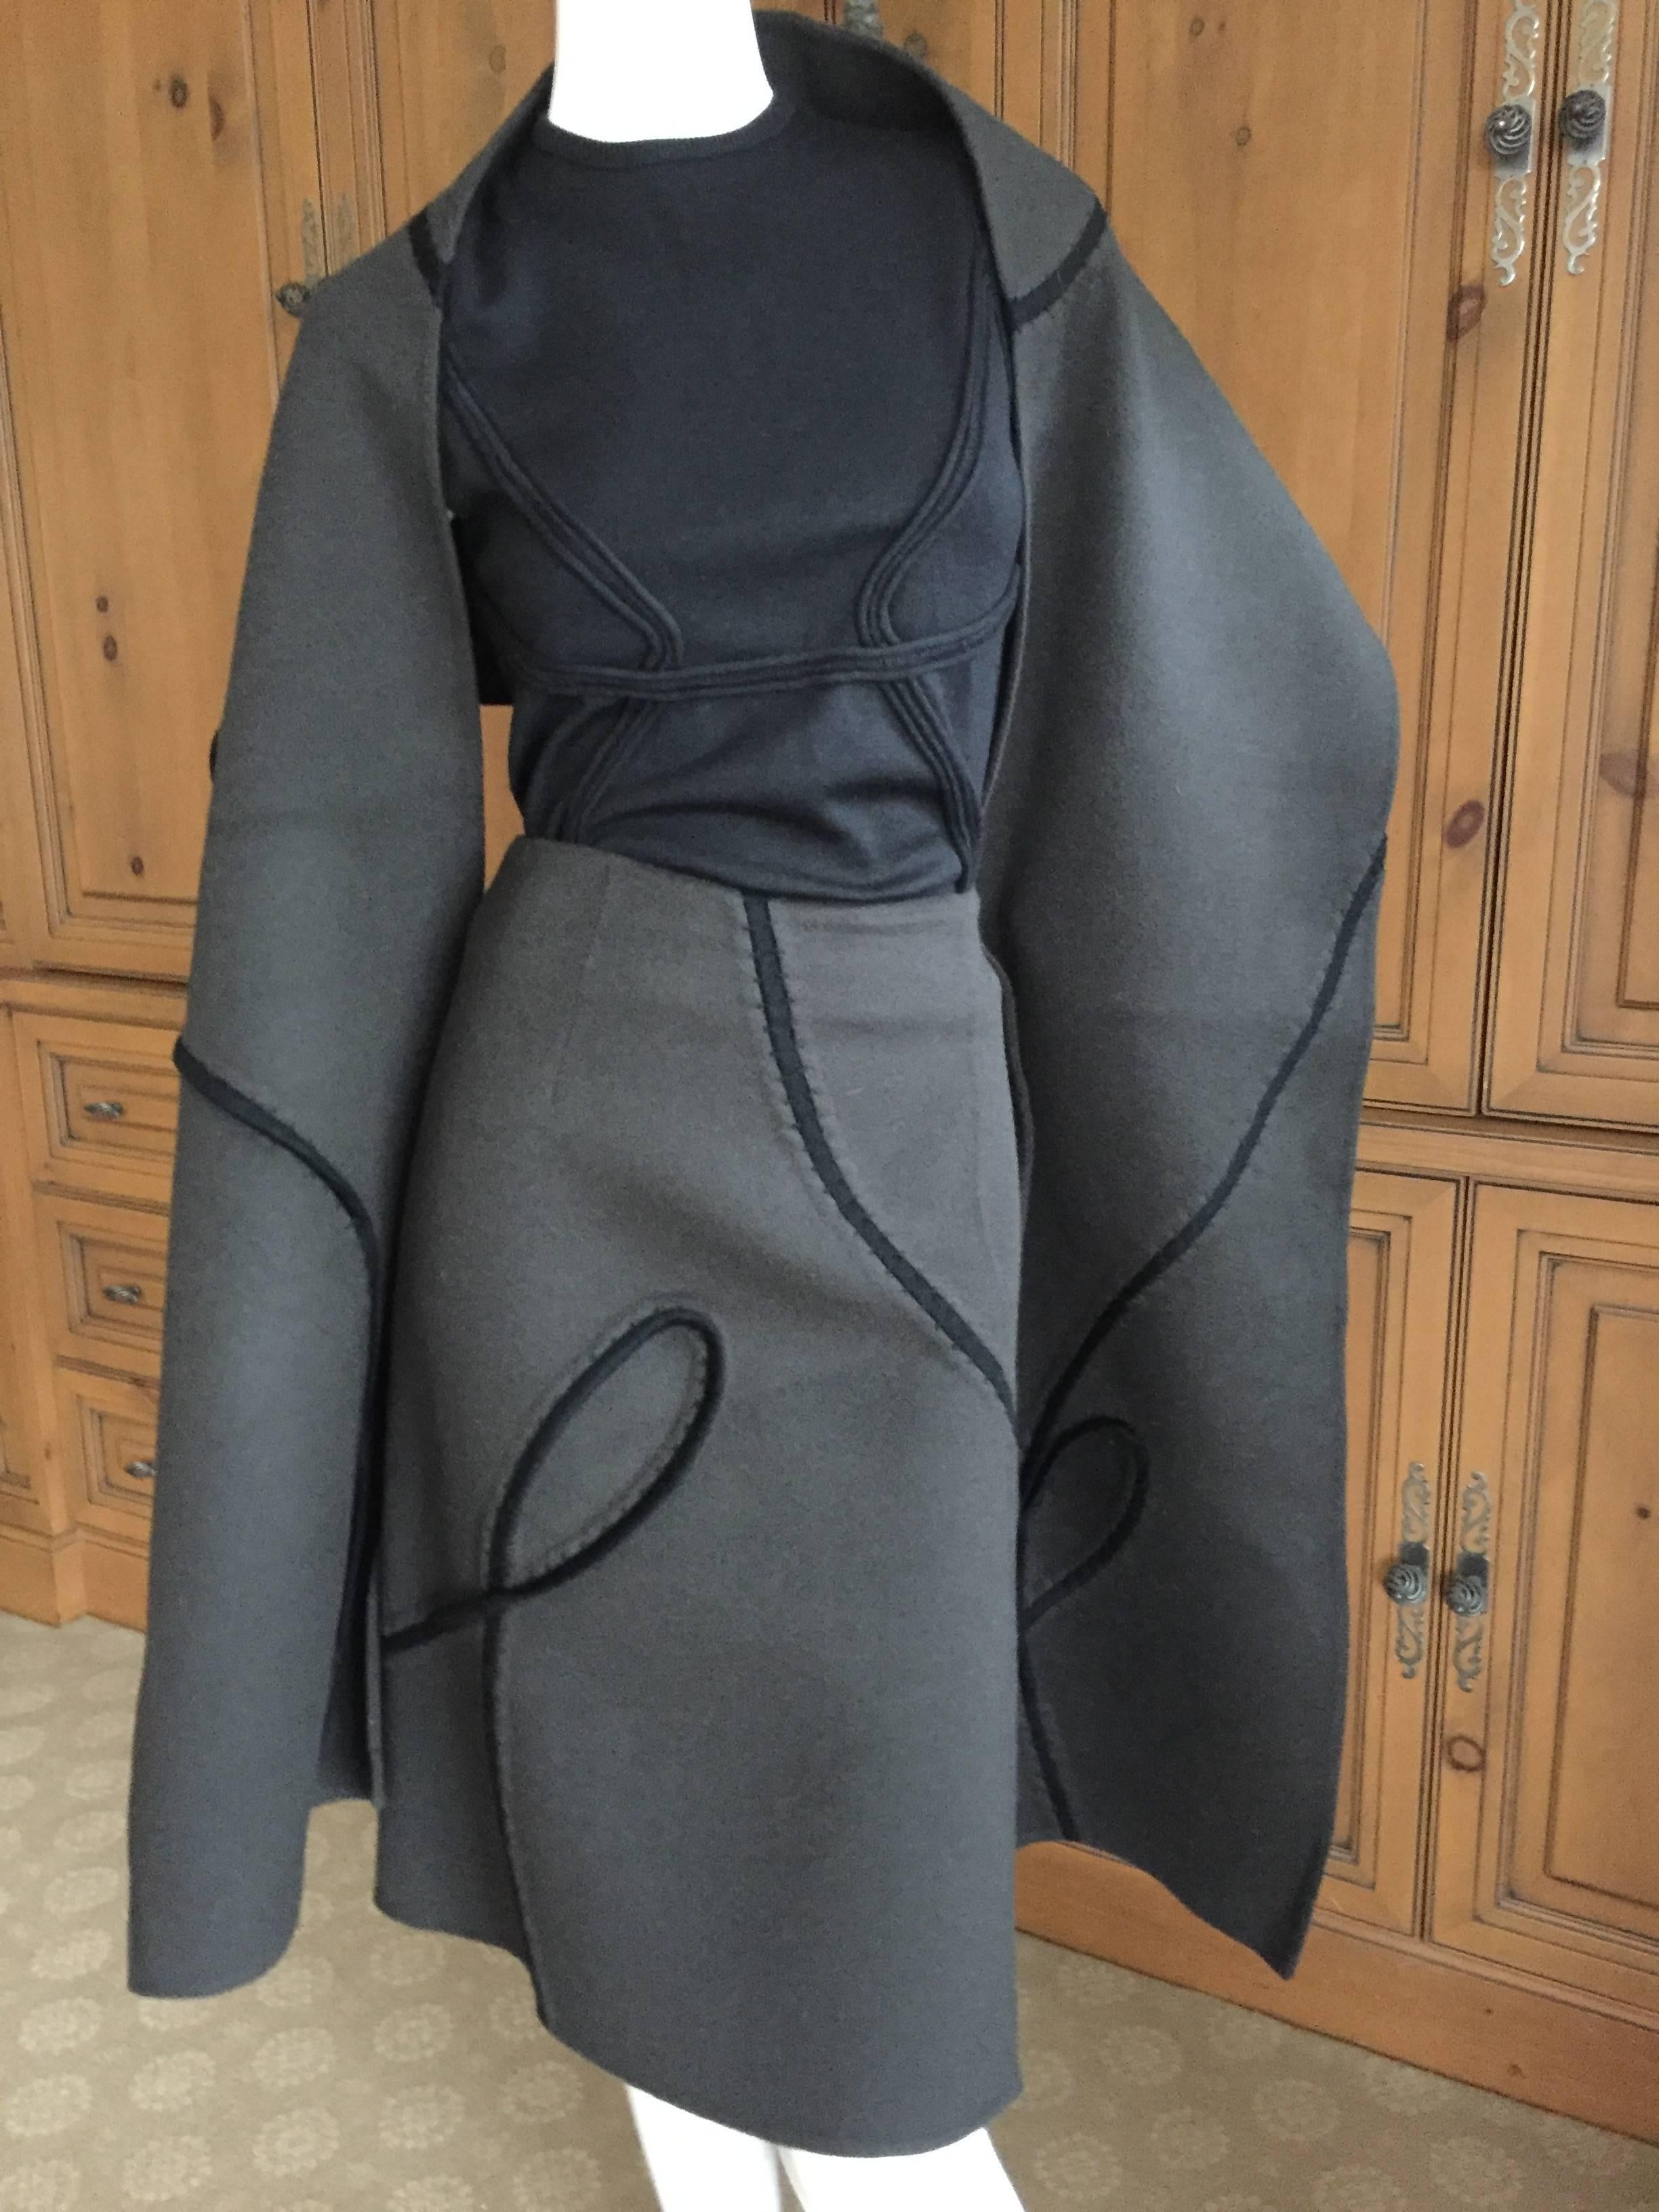 Super luxurious double face cashmere suit from Ralph Rucci  Chado.
Featuring a shell top, skirt and matching shawl.
All featuring the amazing had stitching of the Chado atelier.
Shawl 88